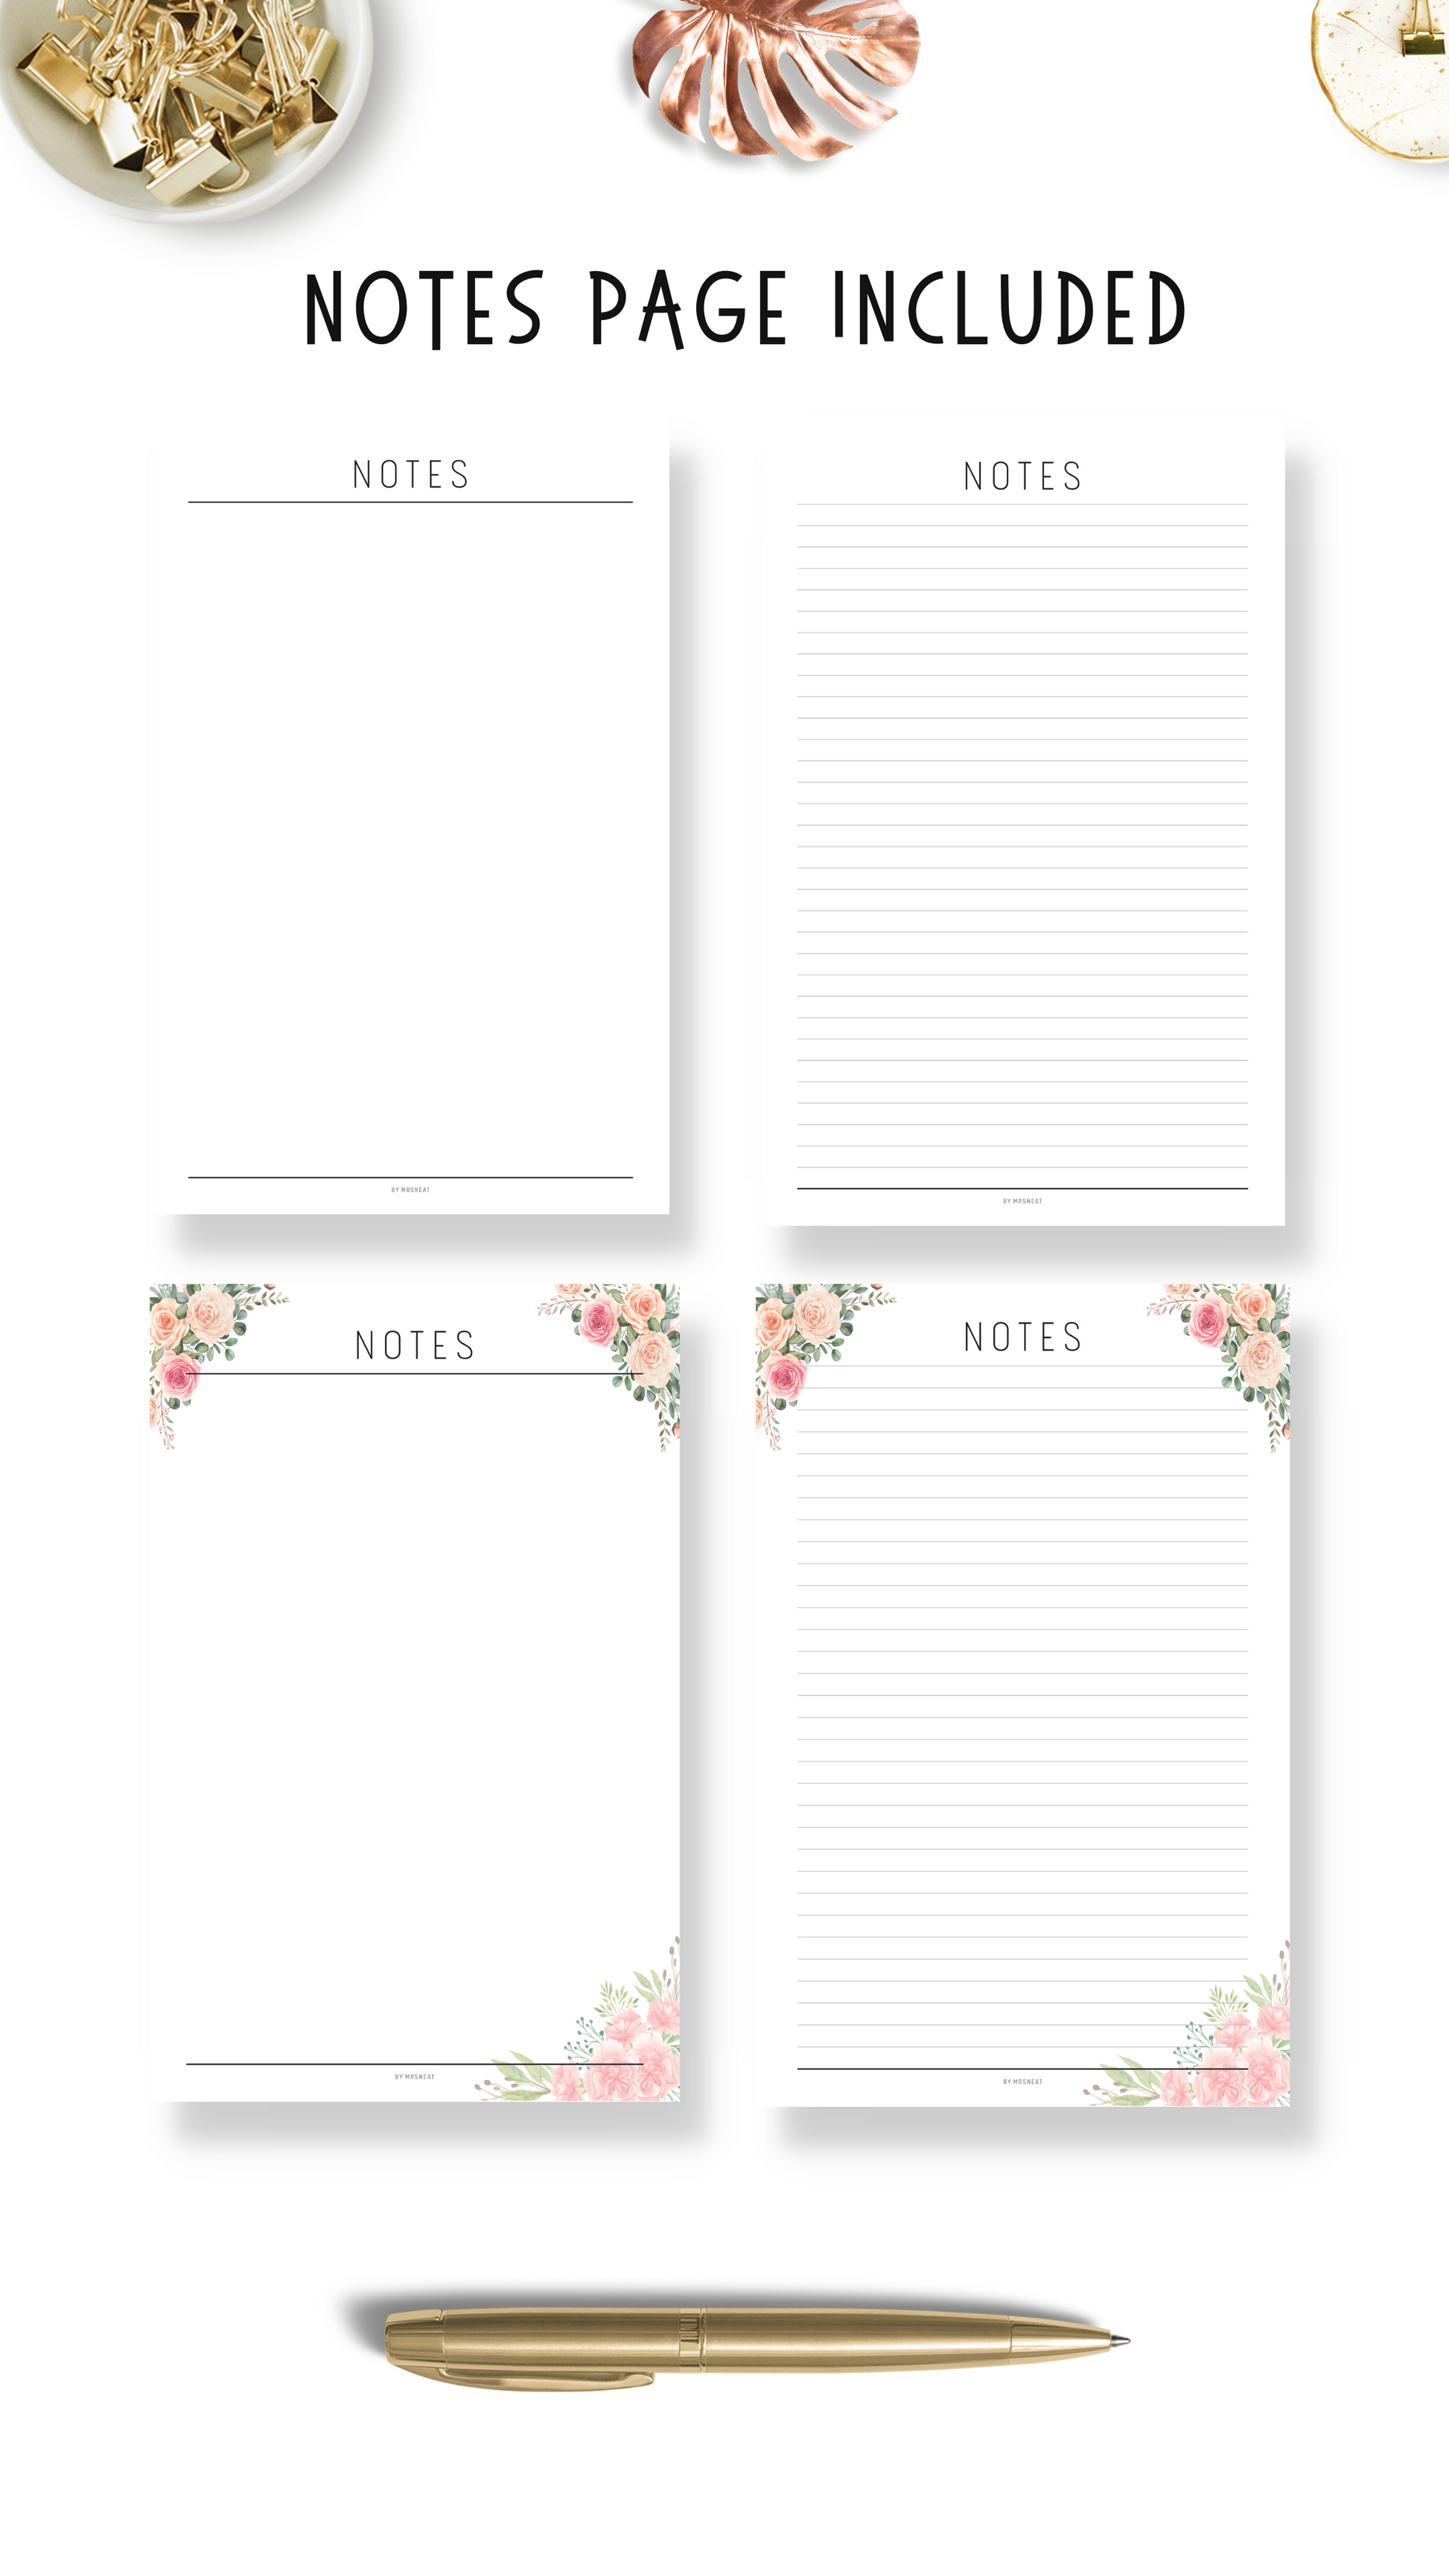 Notes Pages with Lined and Unlined in Neutral and Pink Floral Style